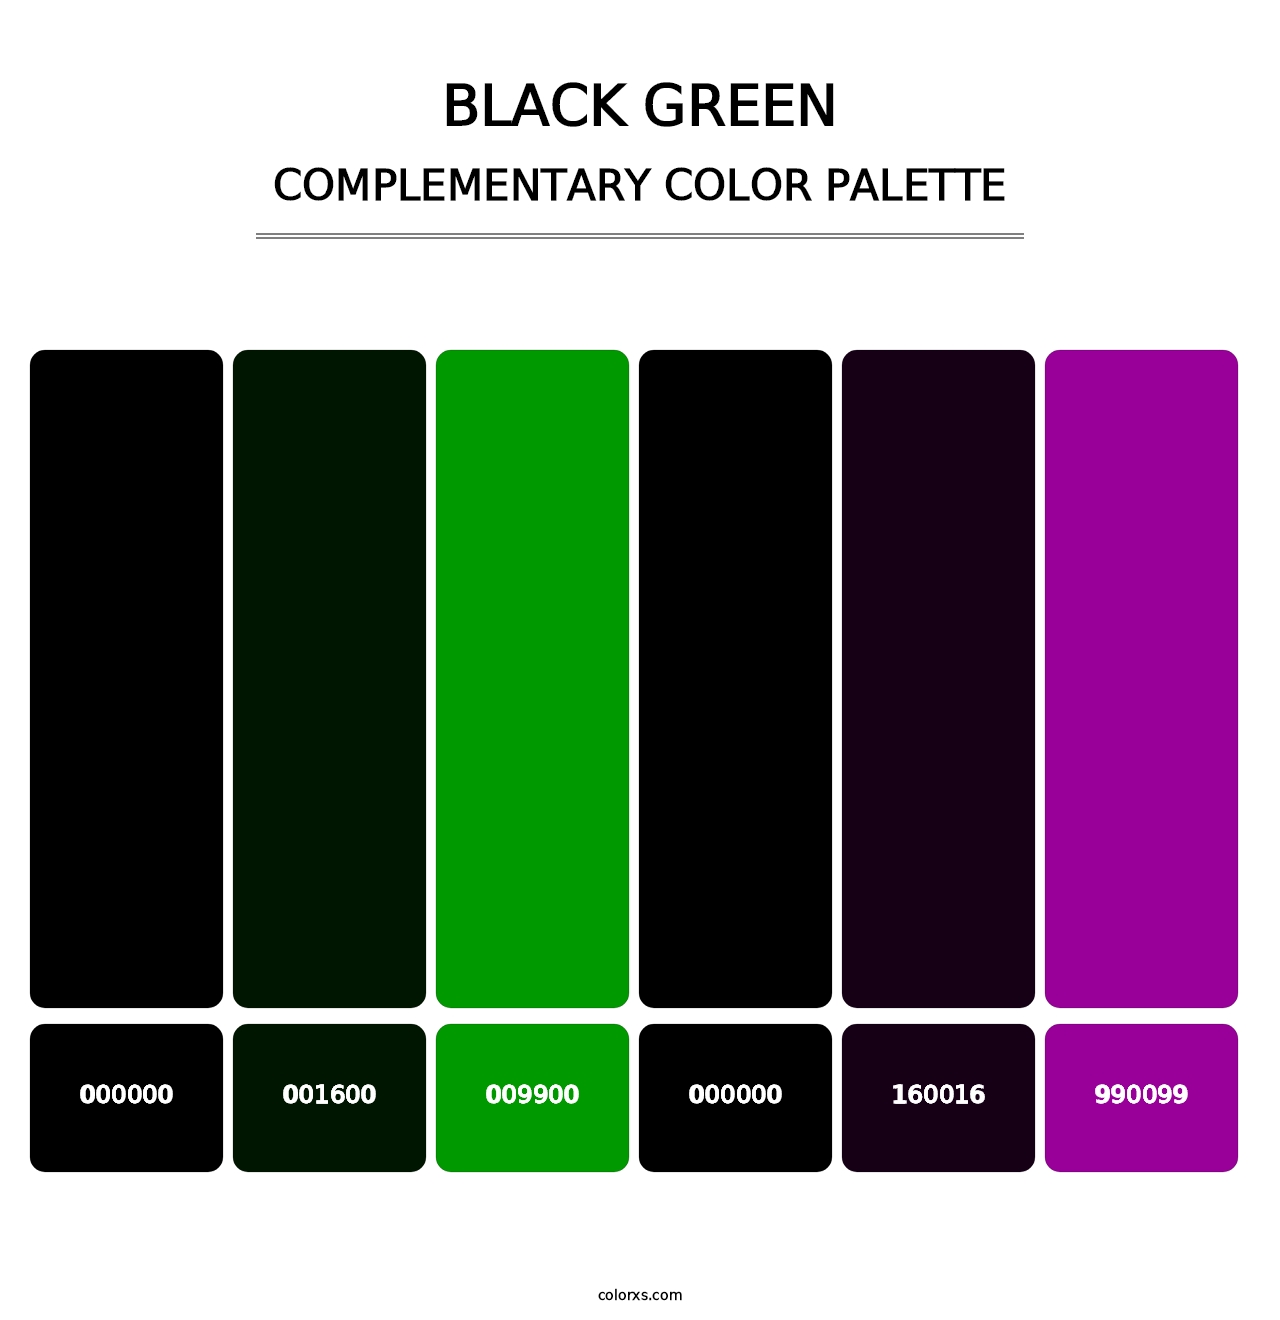 Black Green - Complementary Color Palette